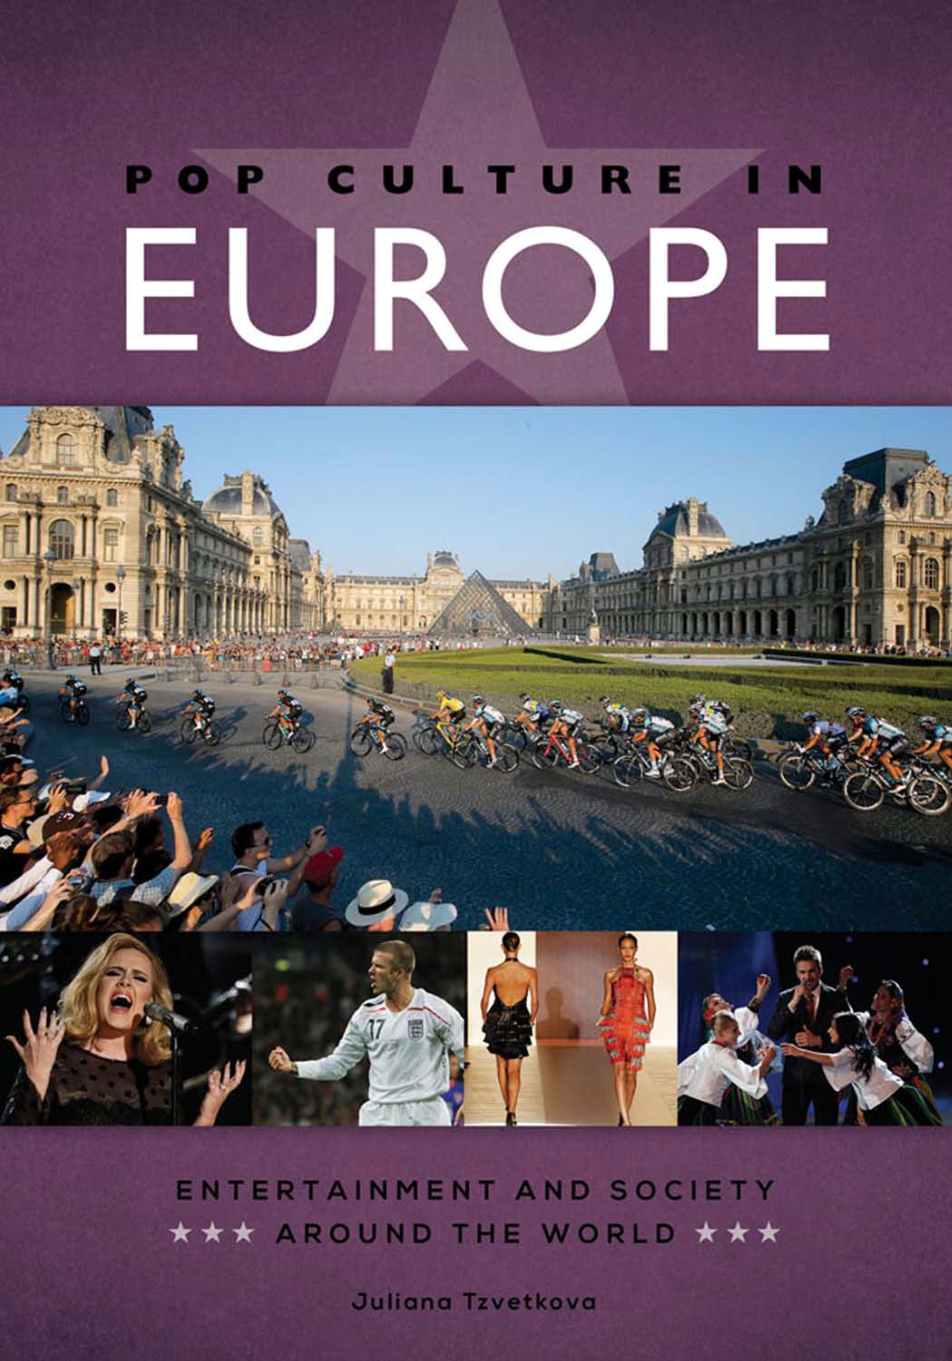 Pop Culture in Europe page Cover1